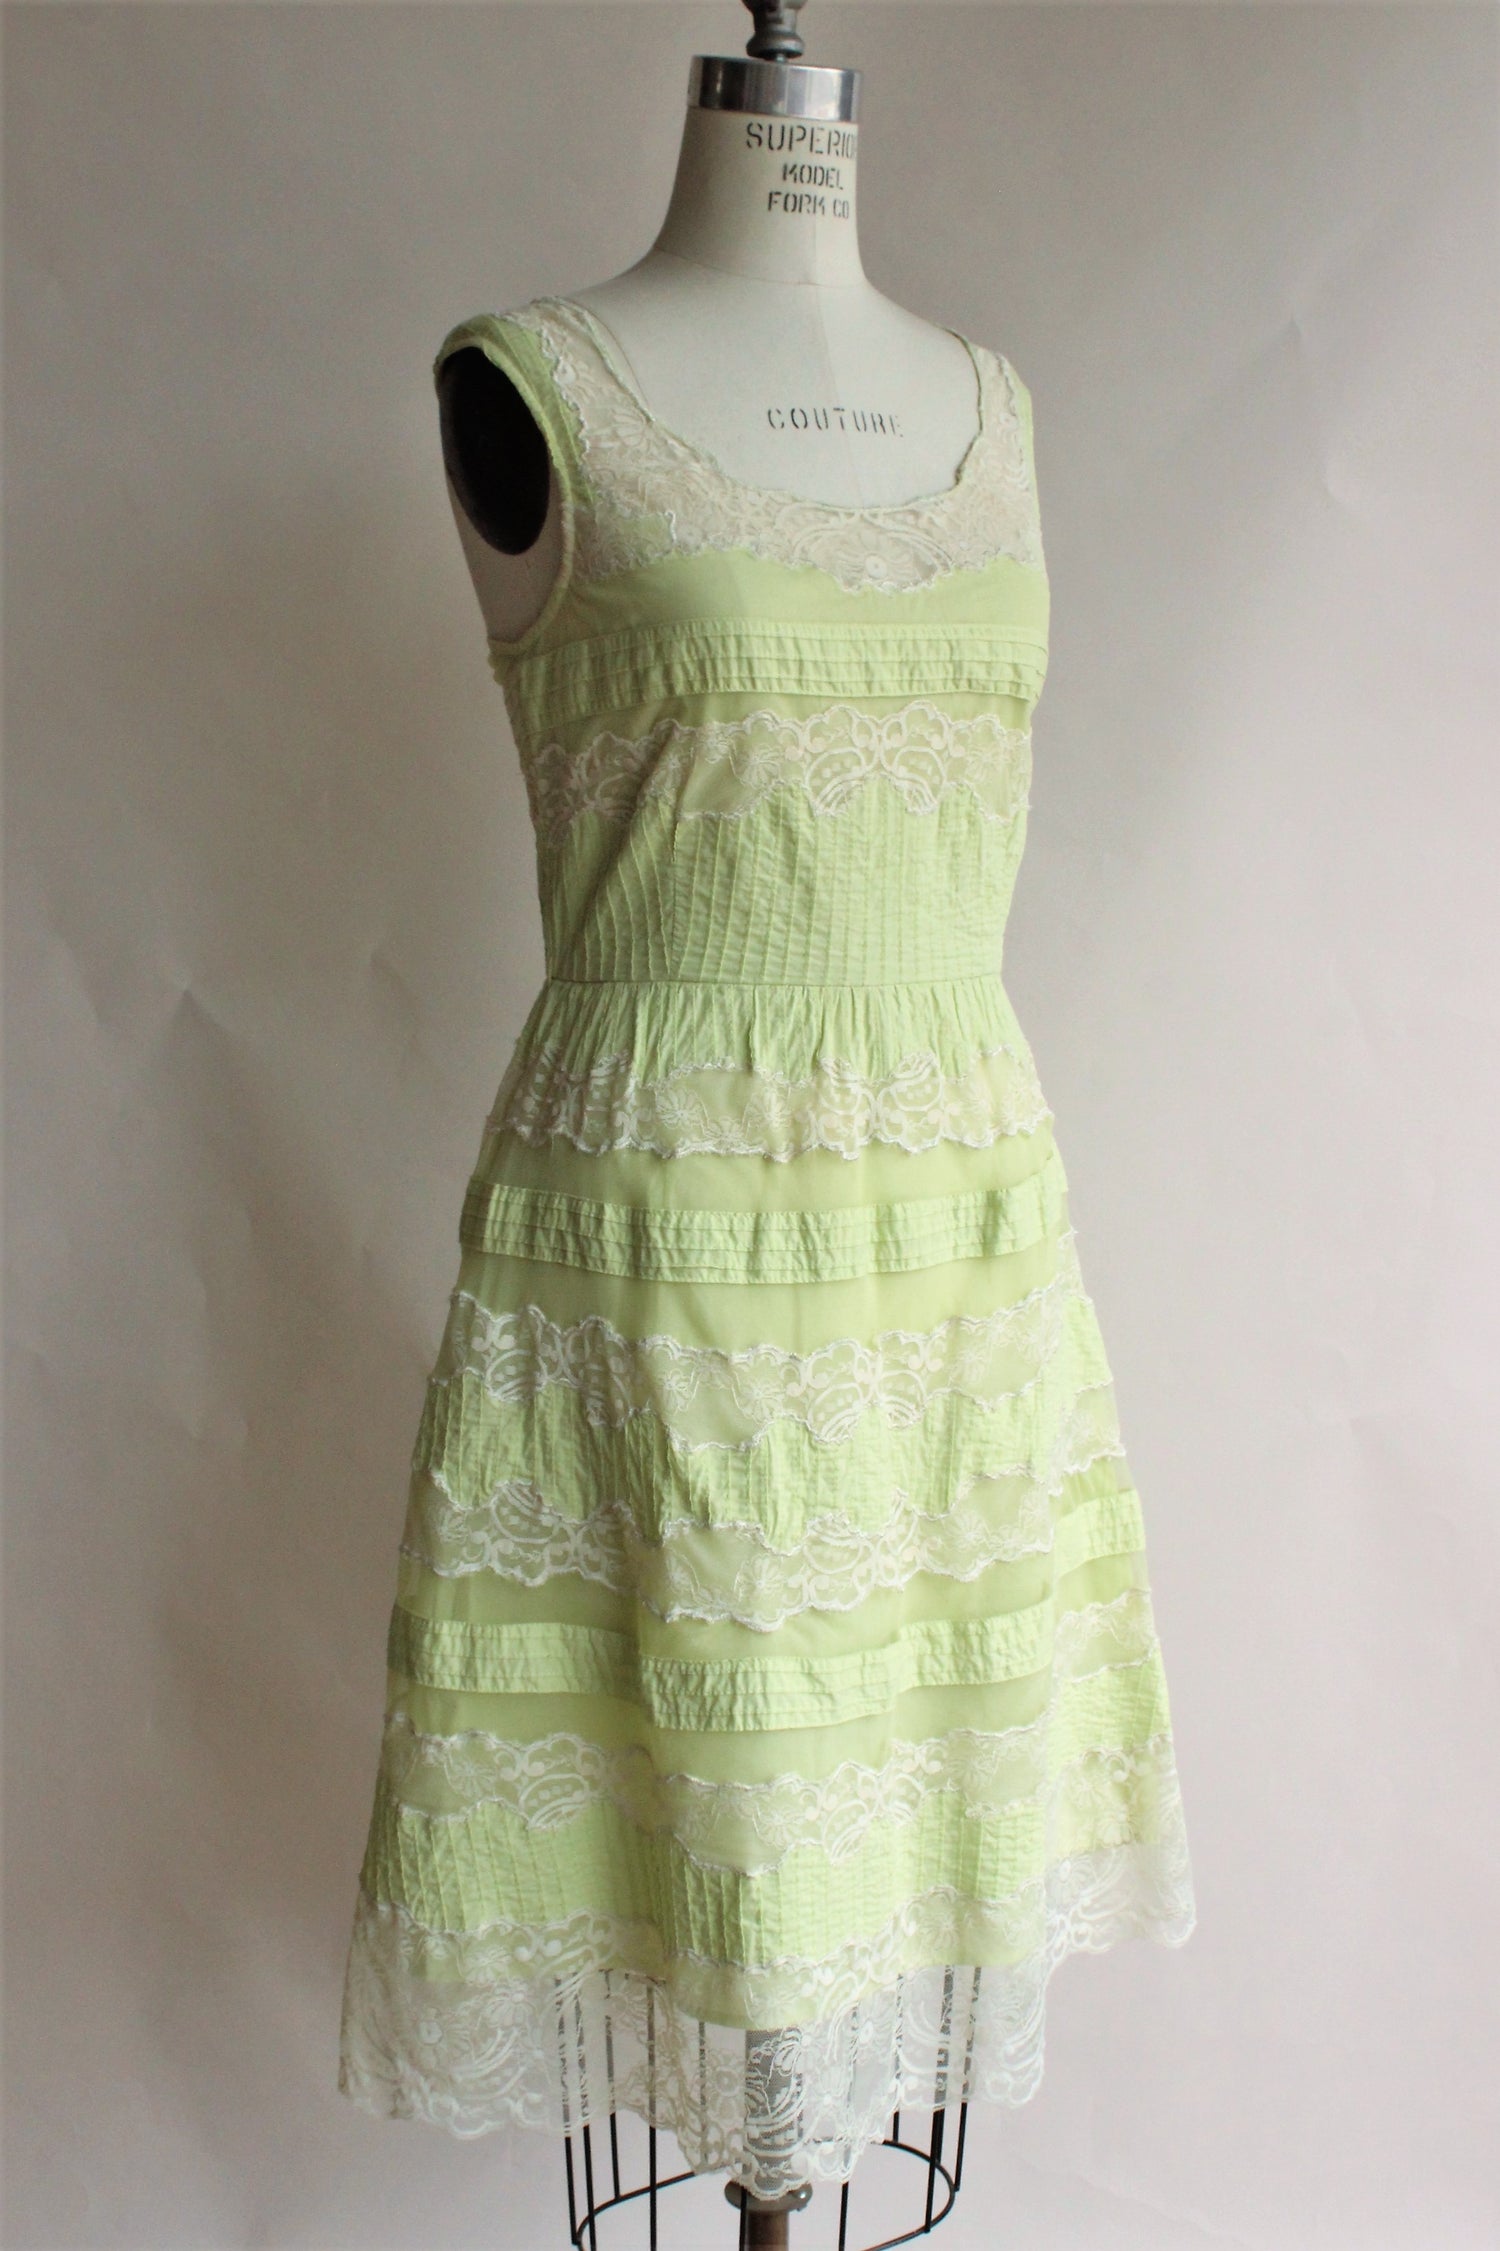 Lithe ( Anthropologie) in green with lace trim, Size 8